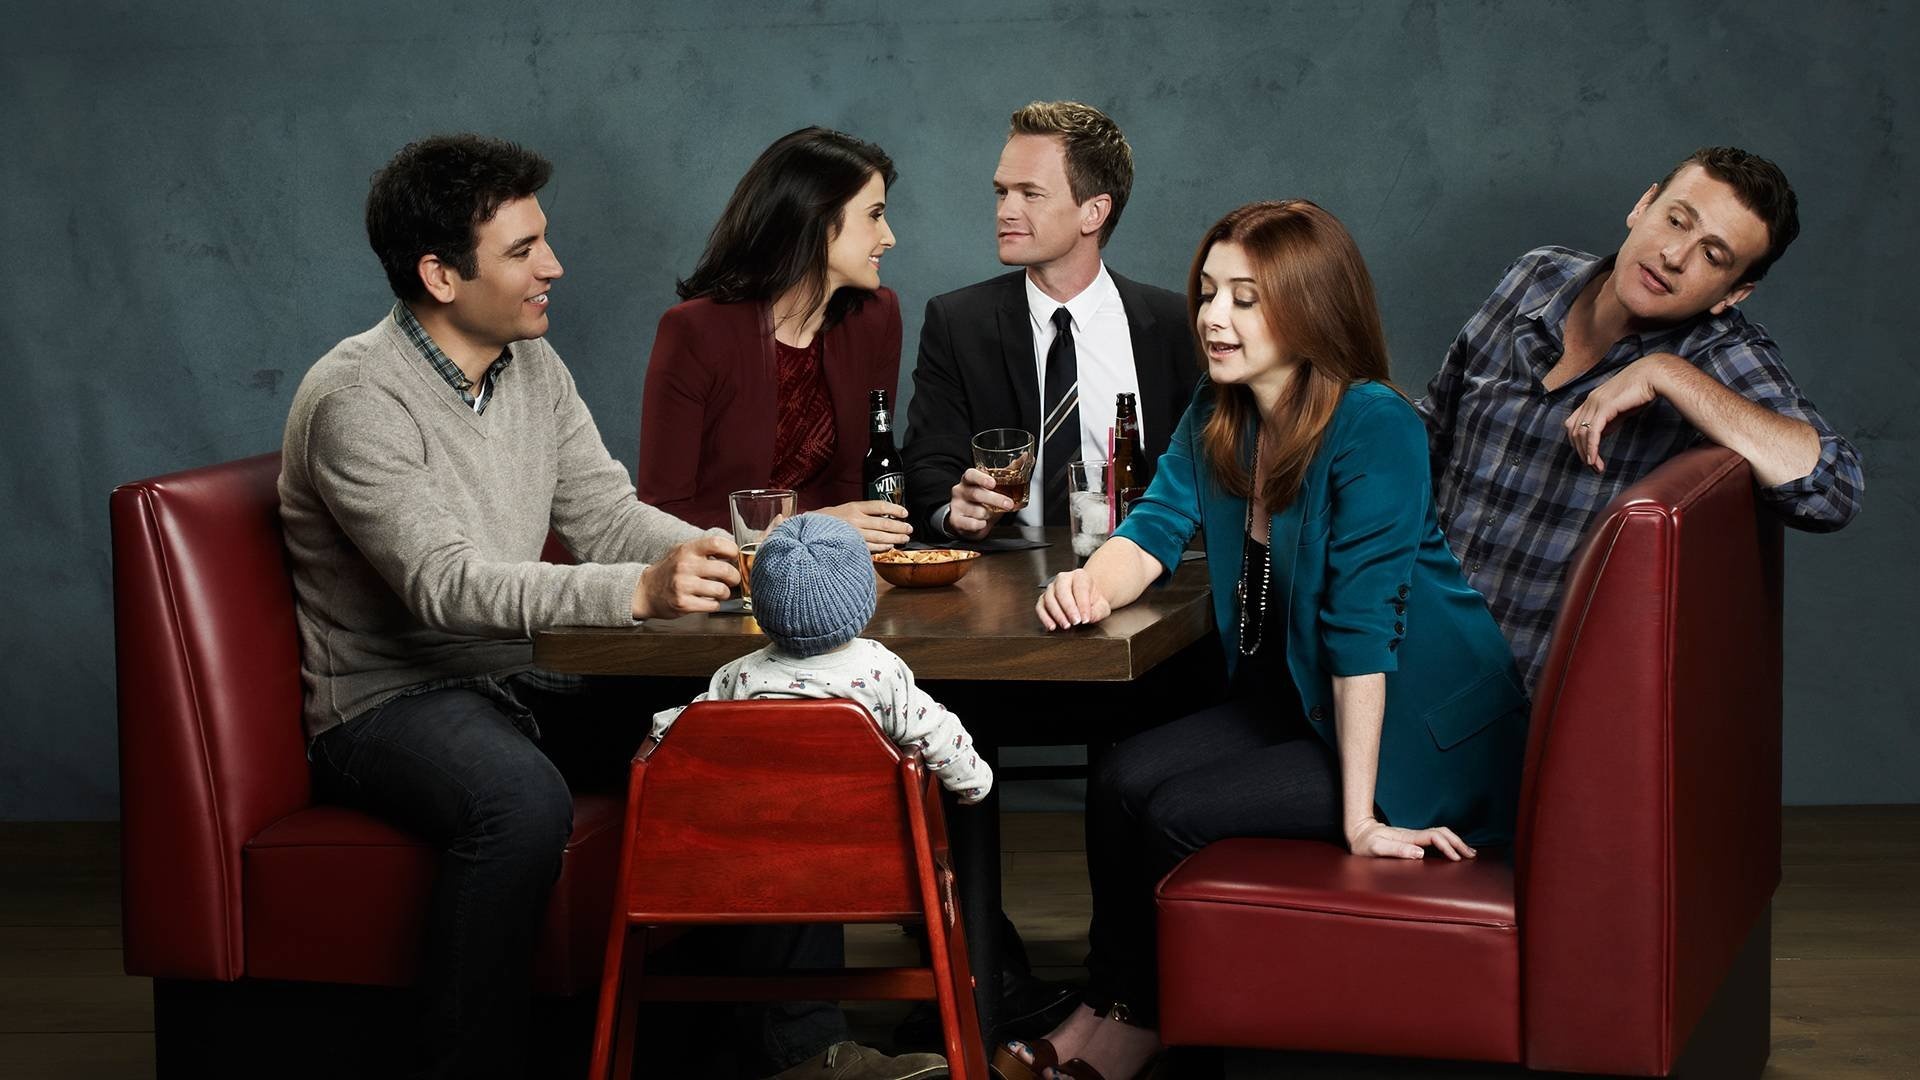 How I Met Your Mother, Comedy sitcom, Television series, 1920x1080 Full HD Desktop